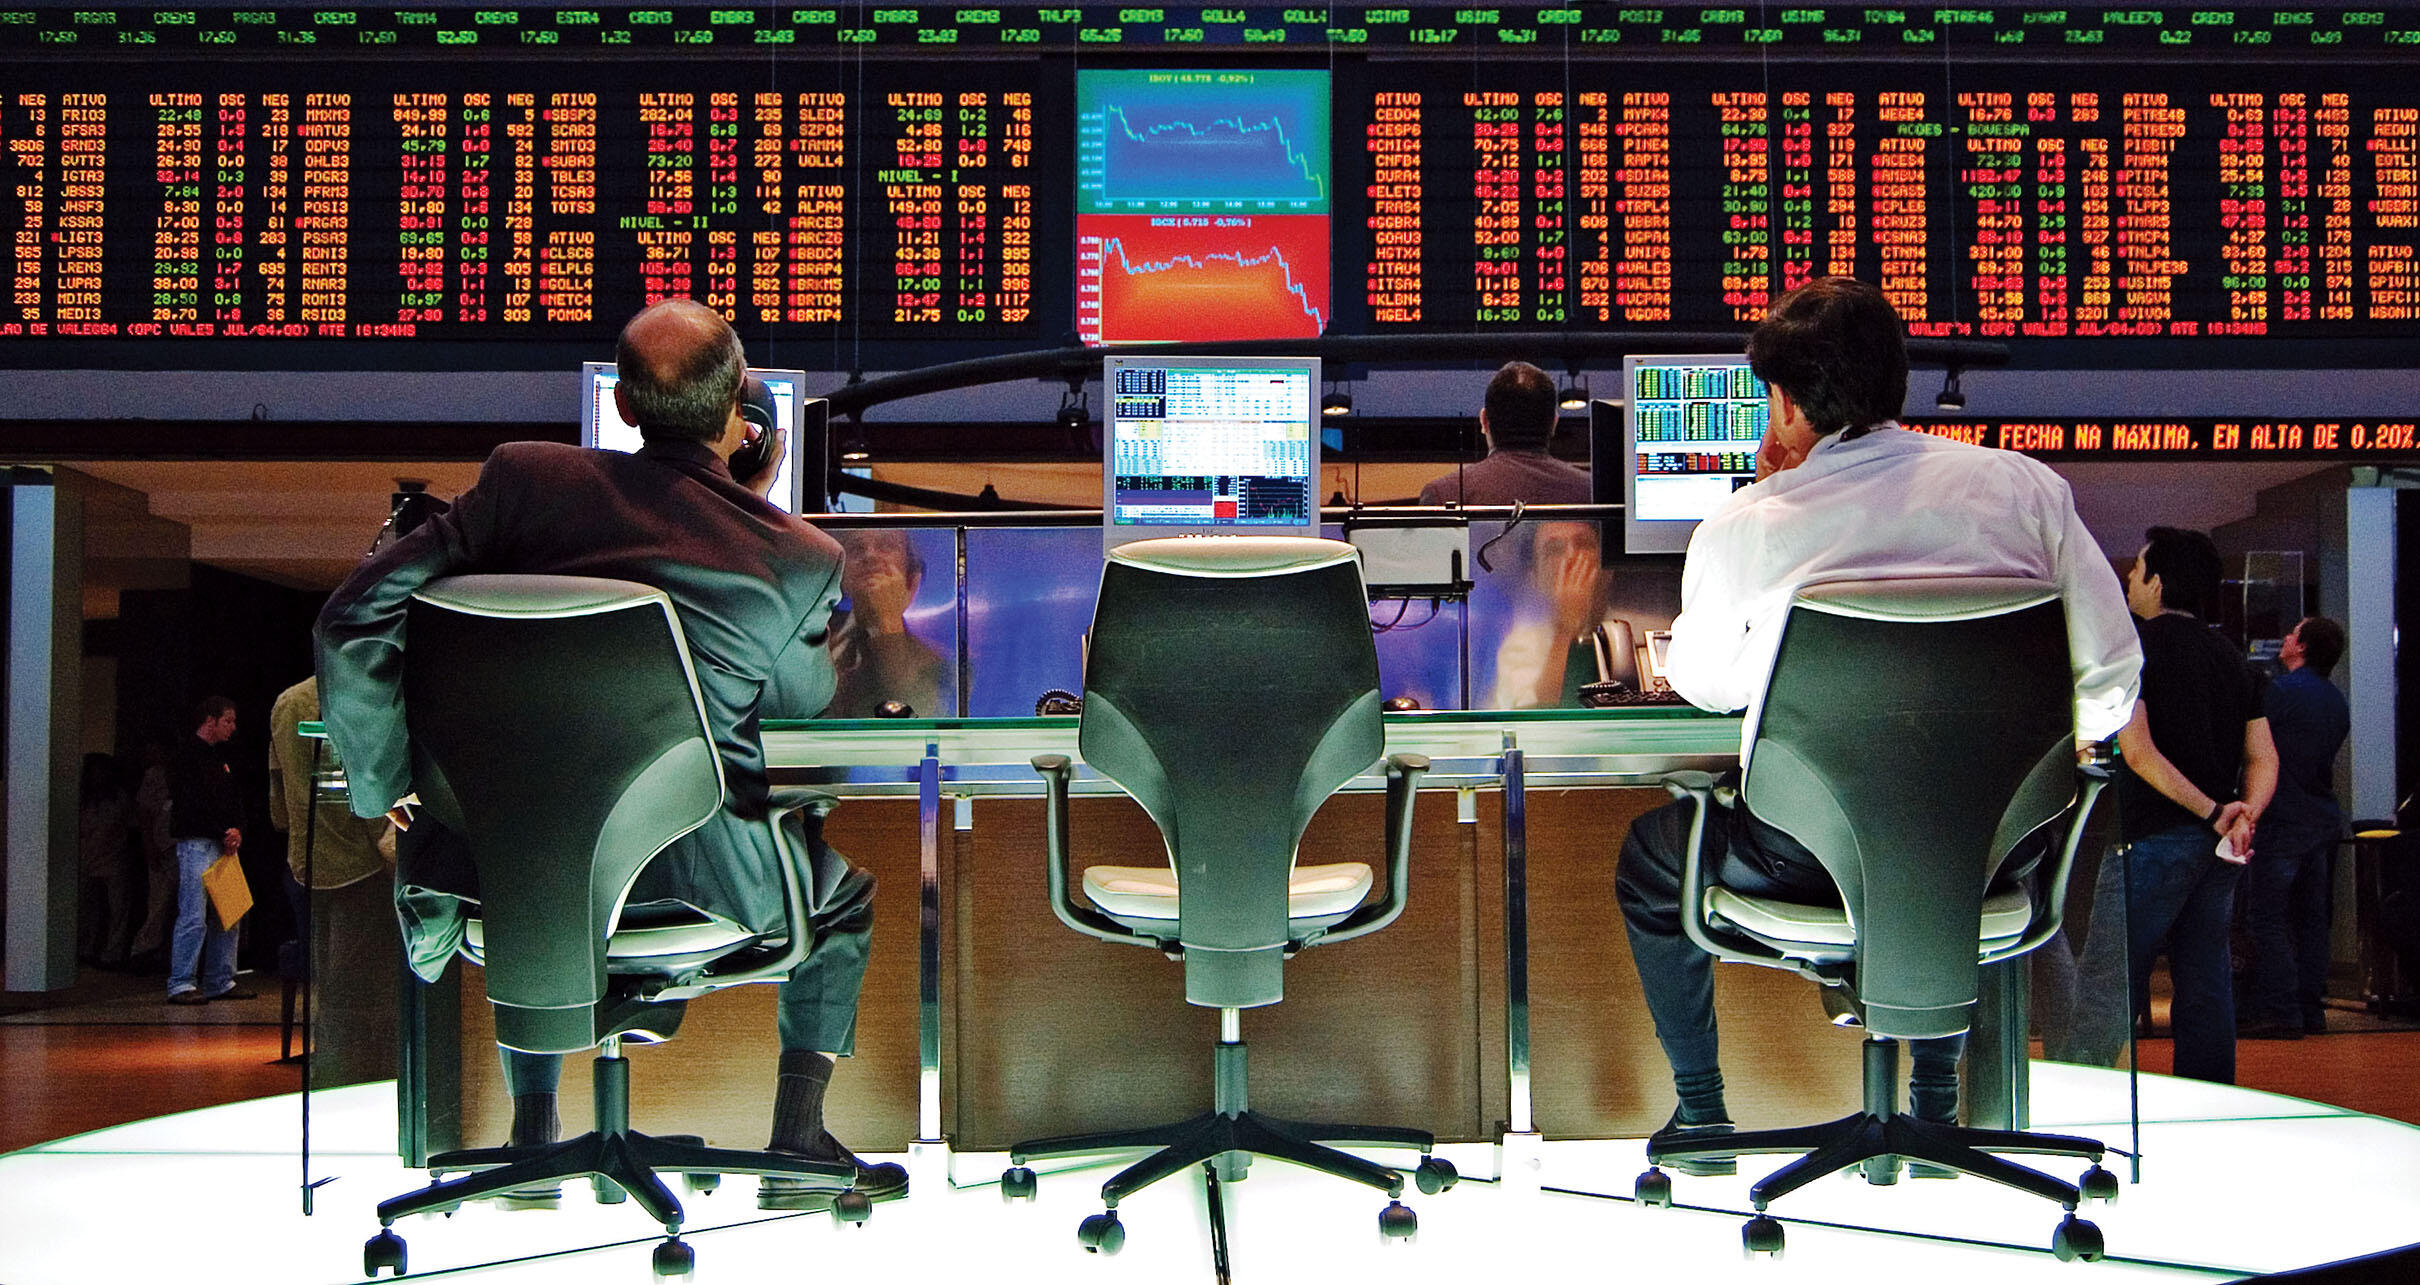 Stock traders watch prices fluctuate at a stock exchange in São Paulo. (Photo by Rafael Matsunaga.)